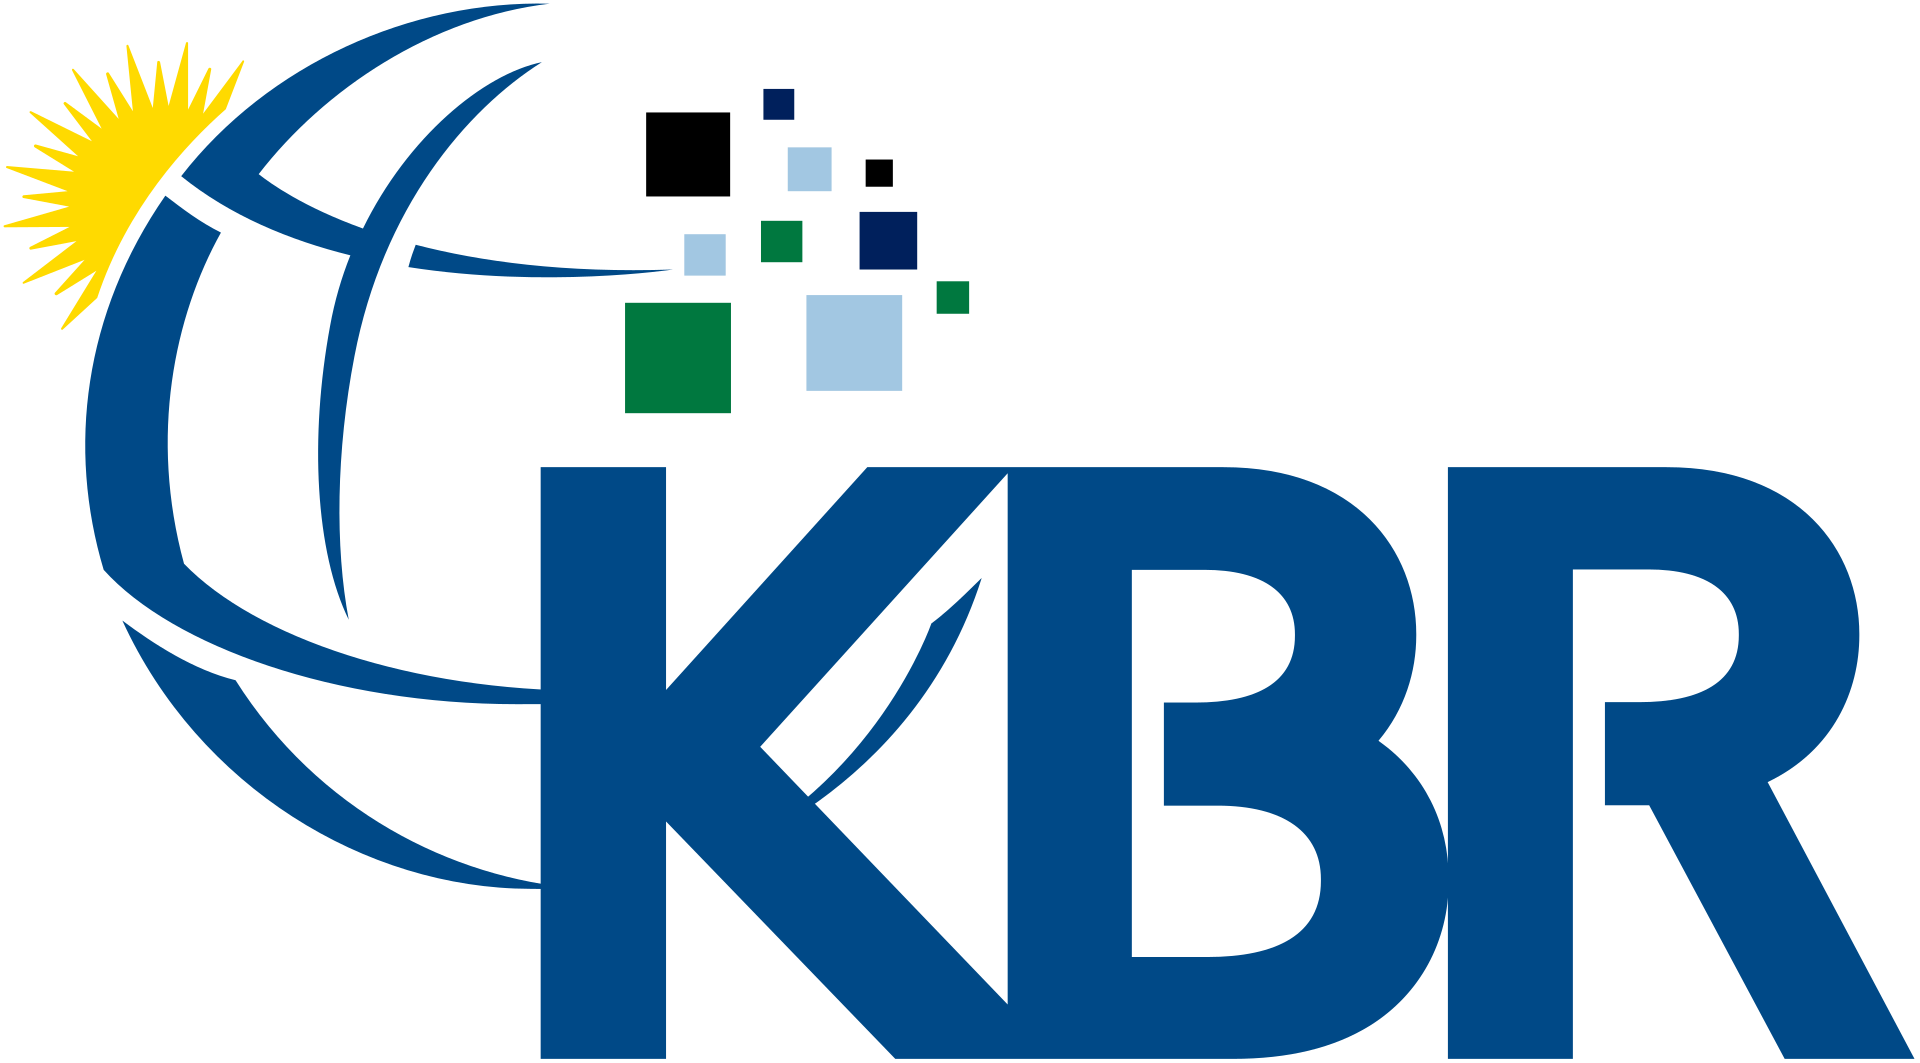 KBR, Inc. logo, By Source (WP:NFCC#4), Fair use, https://en.wikipedia.org/w/index.php?curid=61420148"